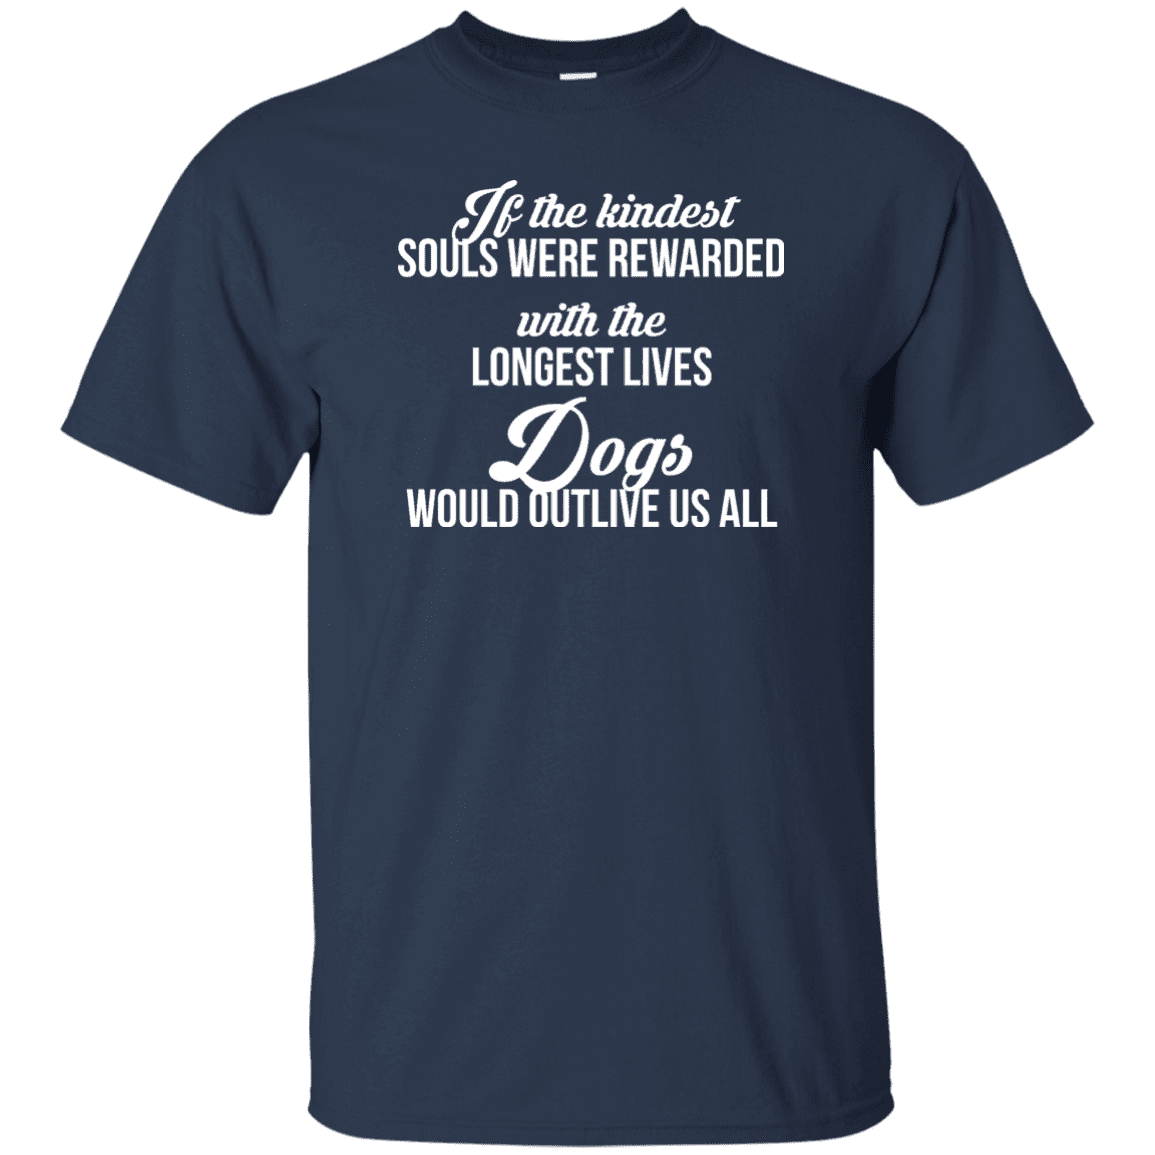 If The Kindest Souls - T Shirt.